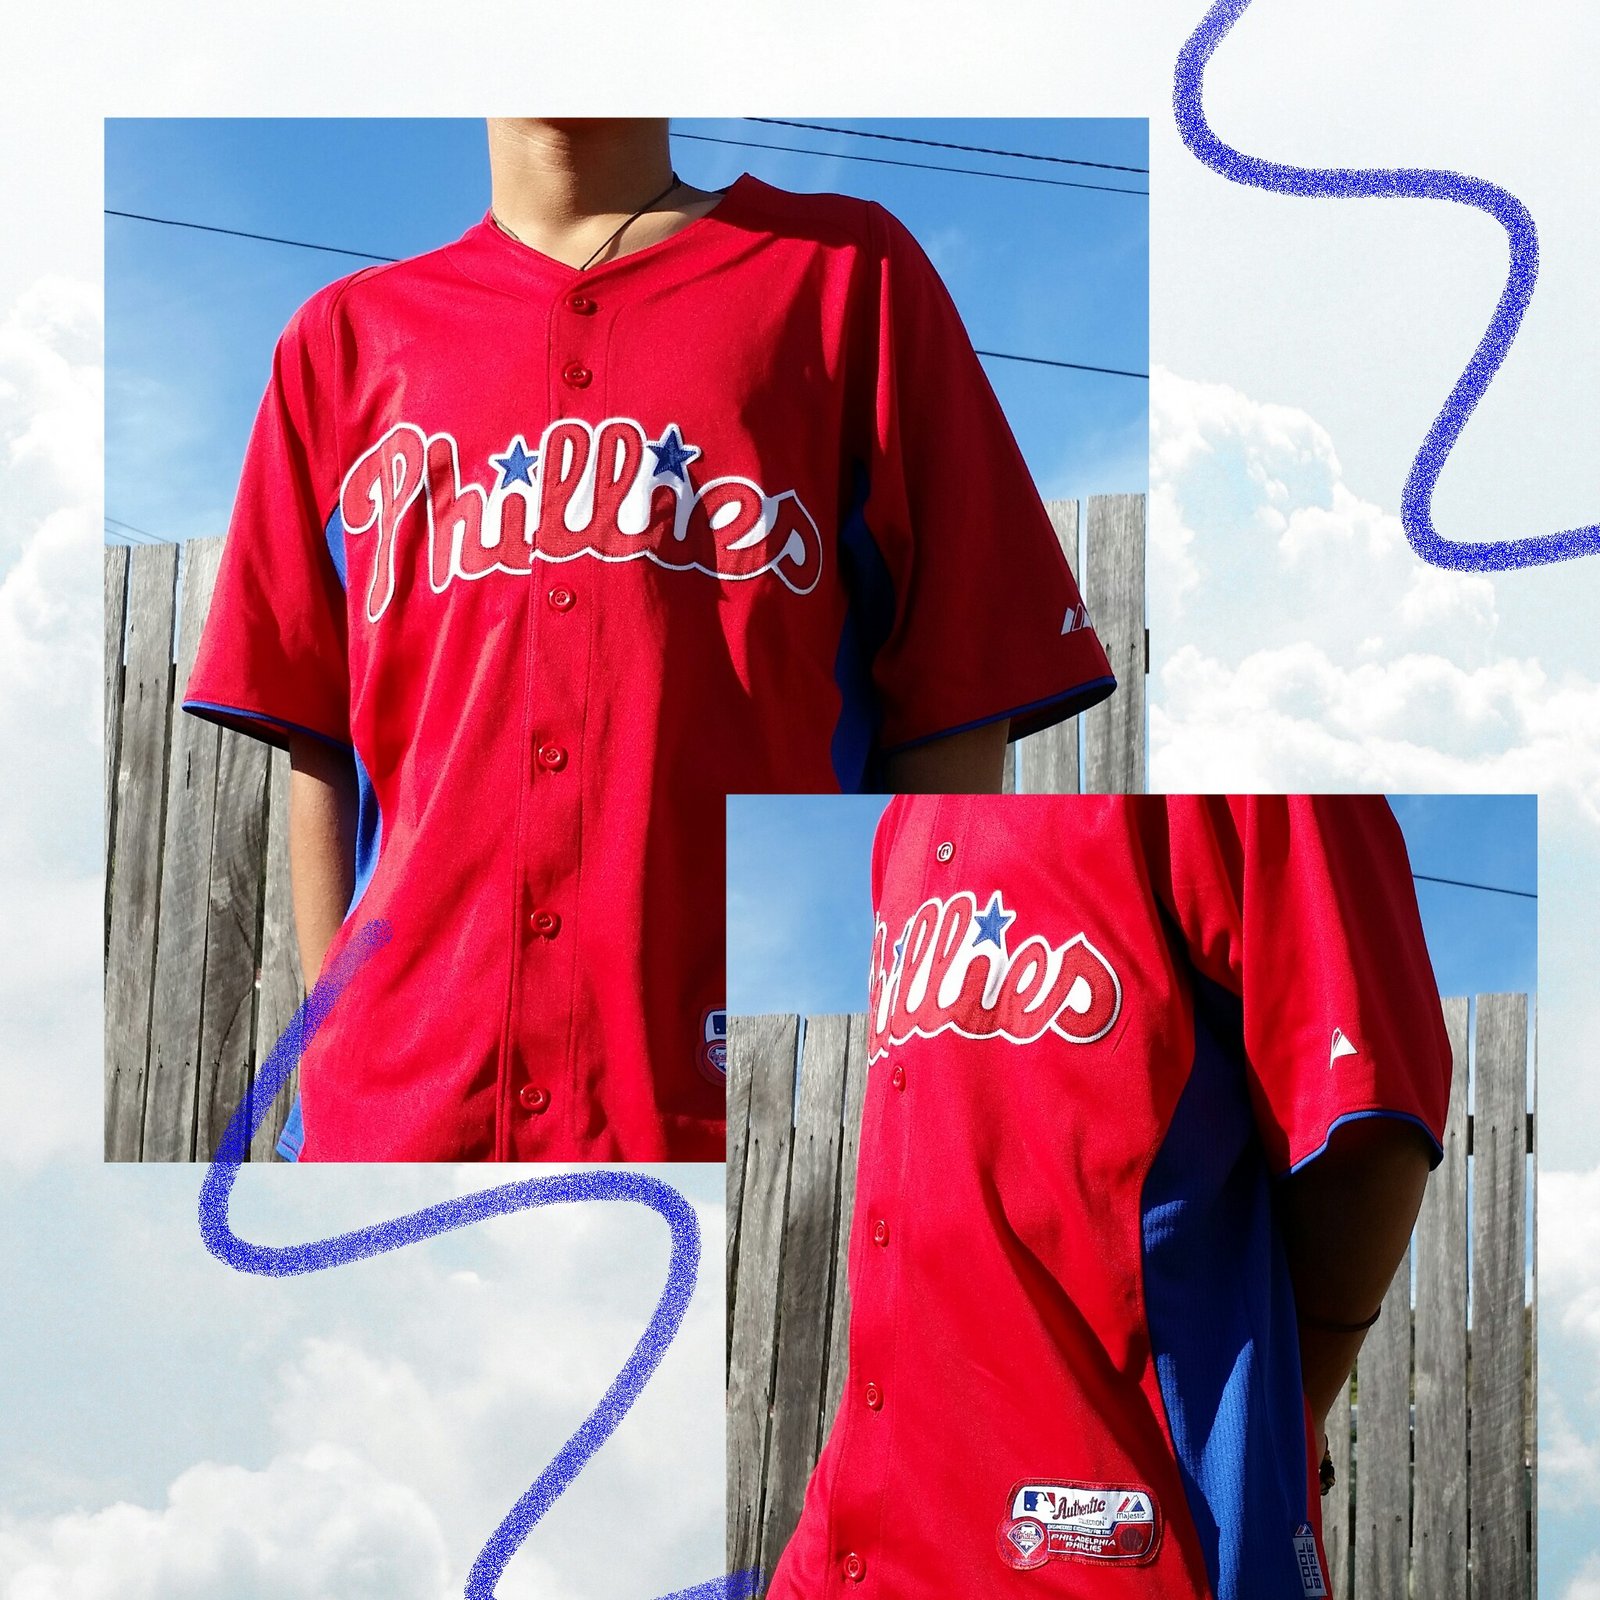 authentic phillies jersey